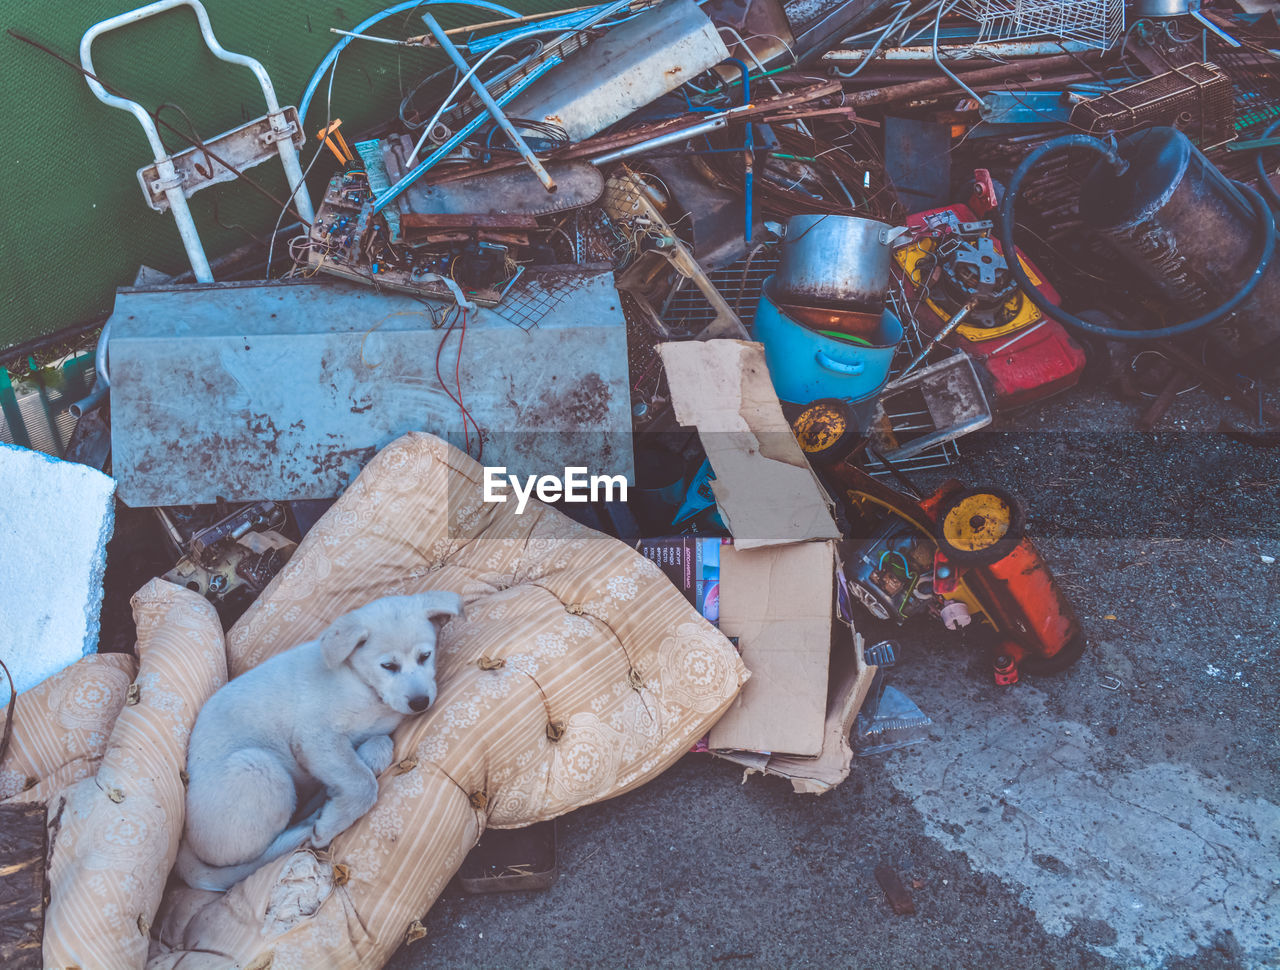 HIGH ANGLE VIEW OF STUFFED TOY ON GARBAGE